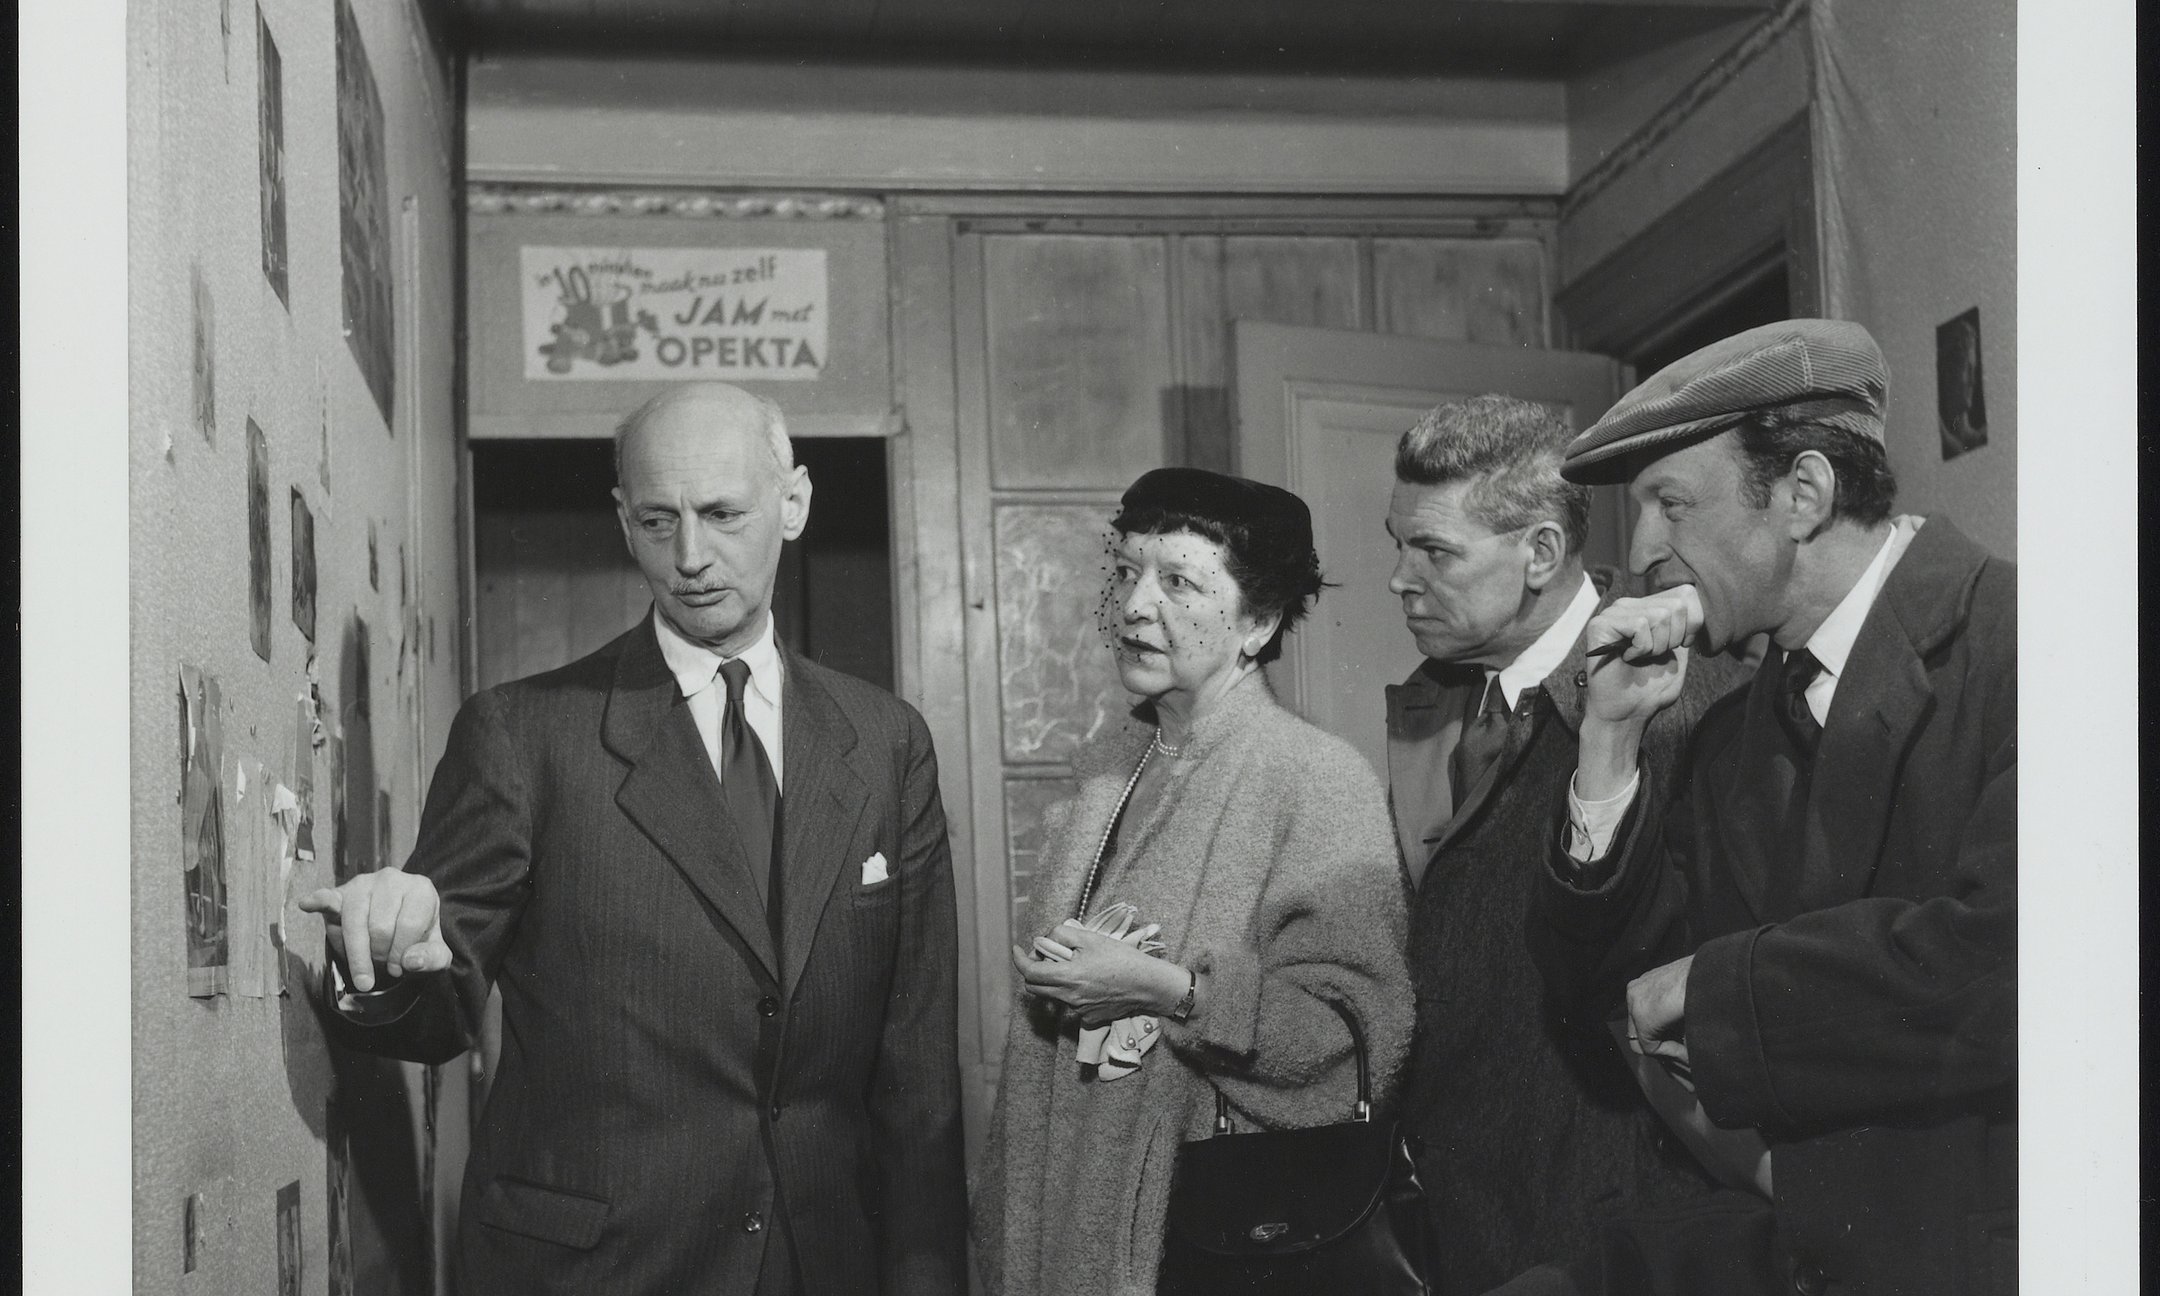 Otto Frank, Frances Goodrich, Albert Hackett, and Garson Kanin in Anne Frank's room, 1954. Otto points at a drawing made by Anne.